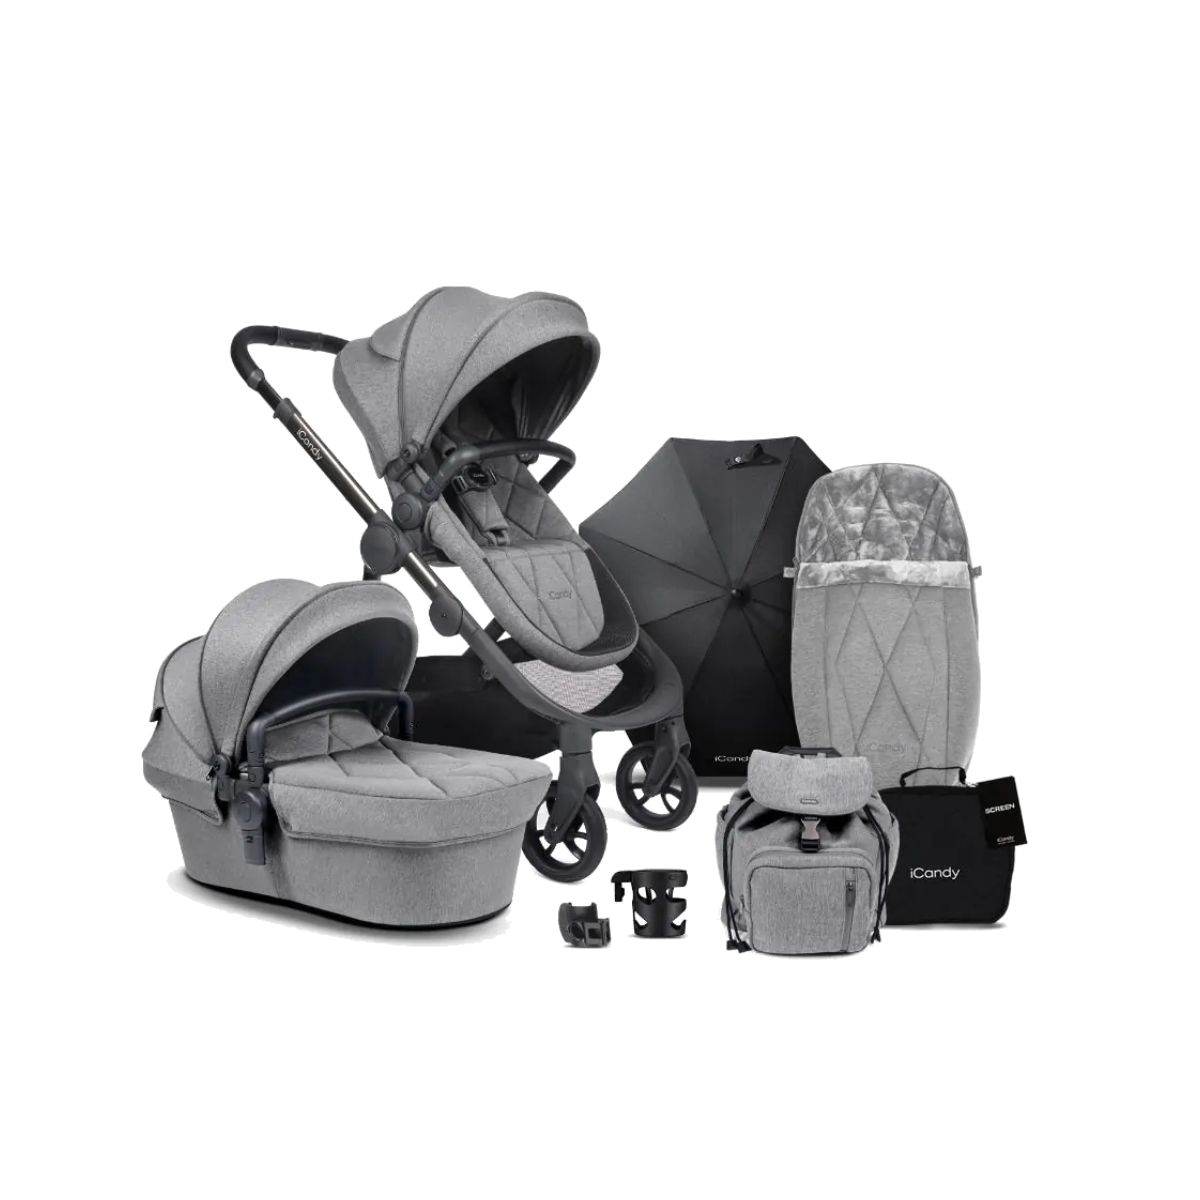 iCandy Orange Pushchair and Carrycot Complete Bundle